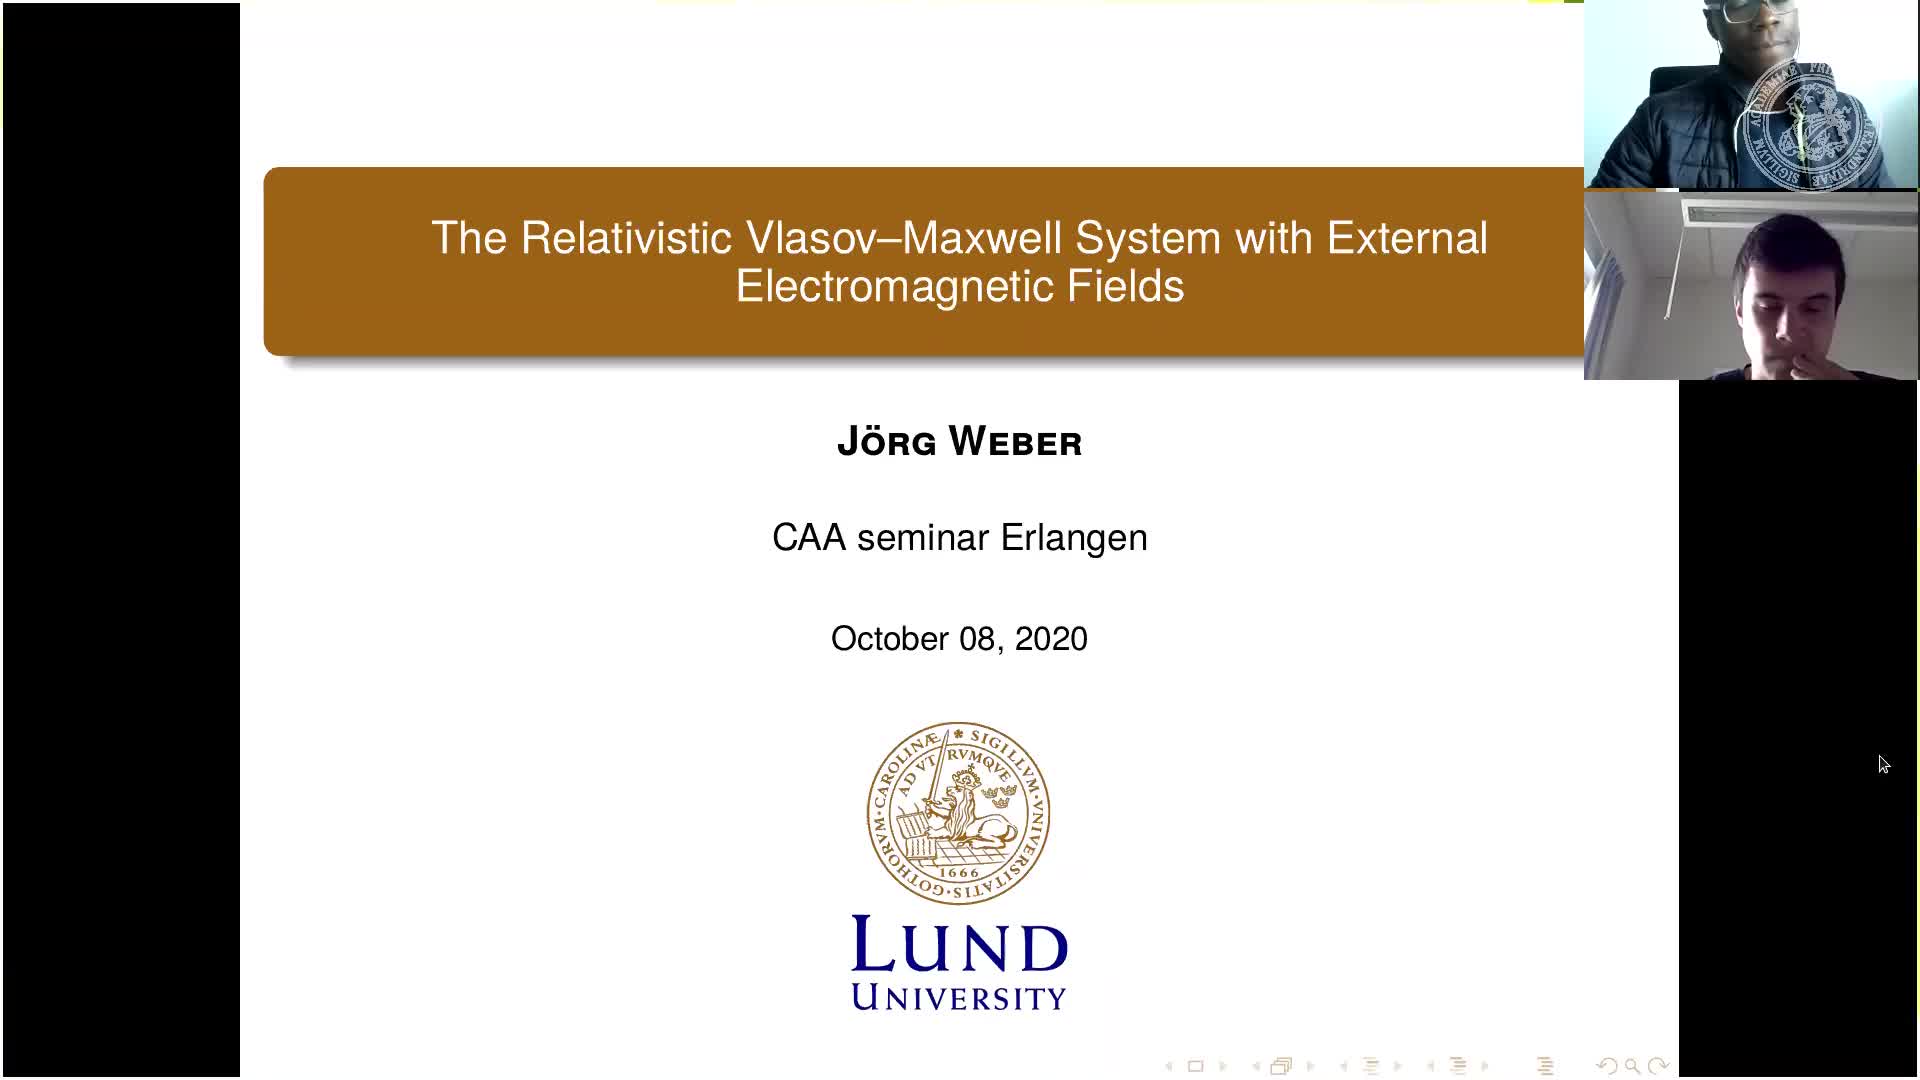 The Relativistic Vlasov–Maxwell System with External Electromagnetic Fields (Joerg Weber, Lund University) preview image